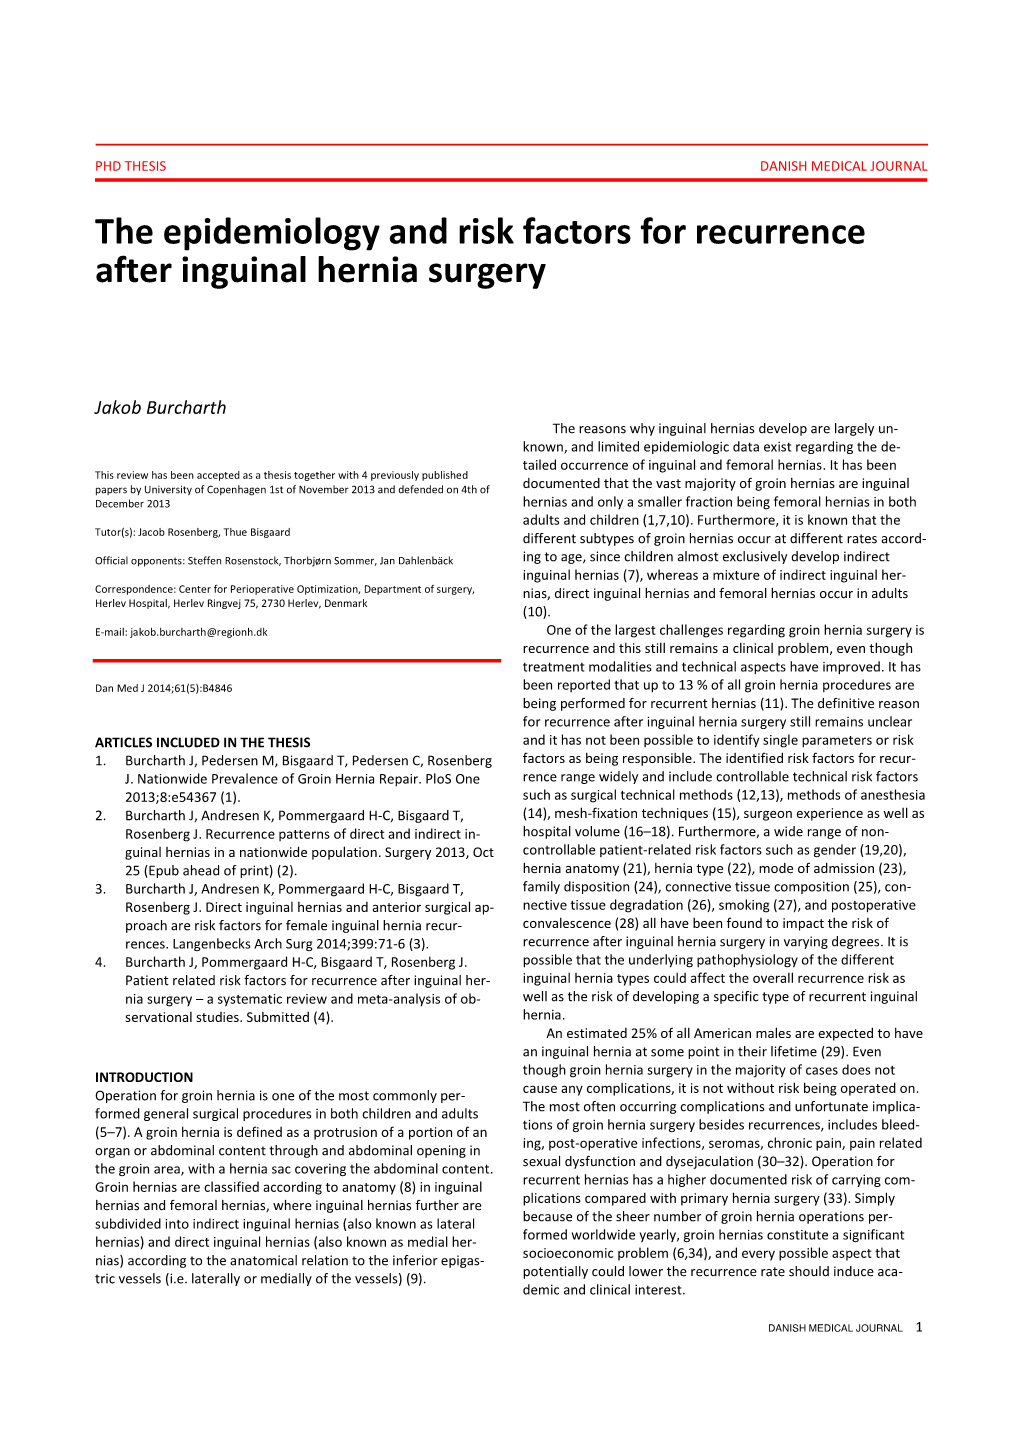 The Epidemiology and Risk Factors for Recurrence After Inguinal Hernia Surgery